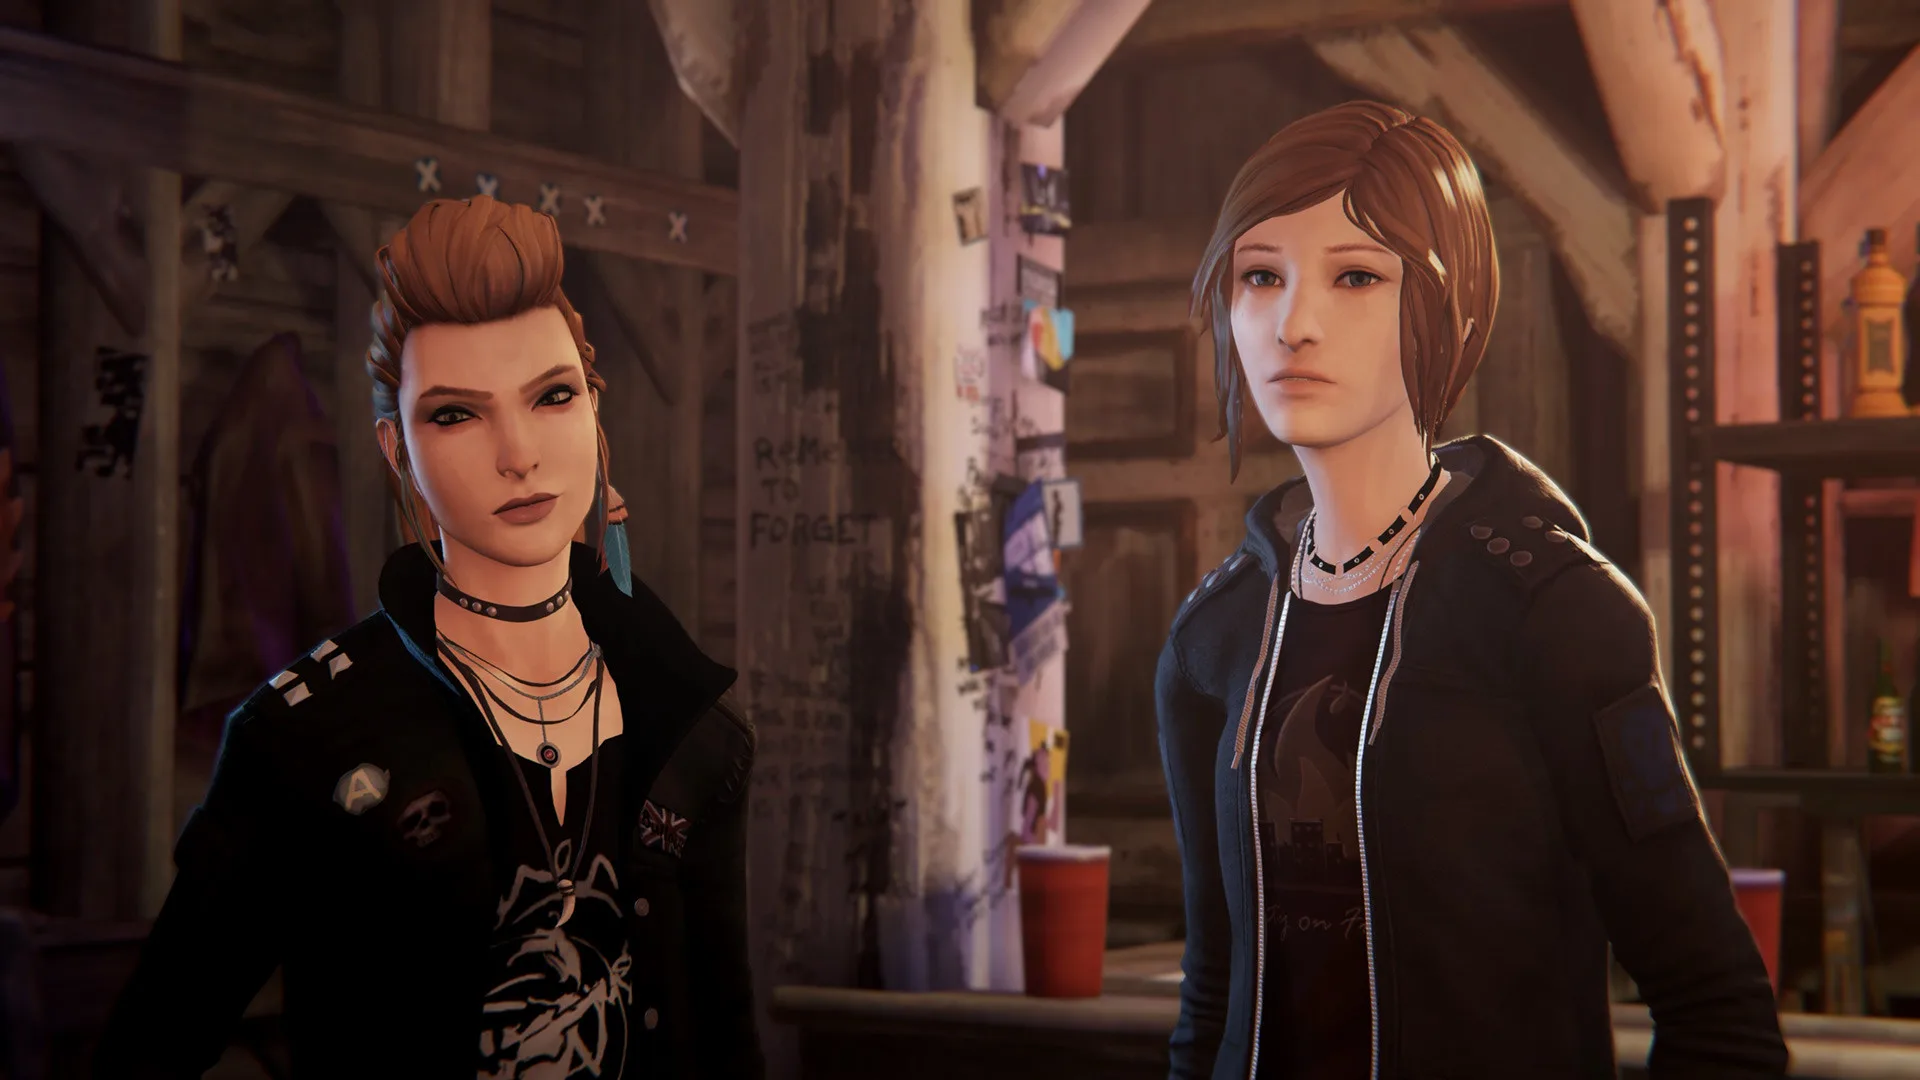 Life Is Strange Before The Storm Remastered Torrent